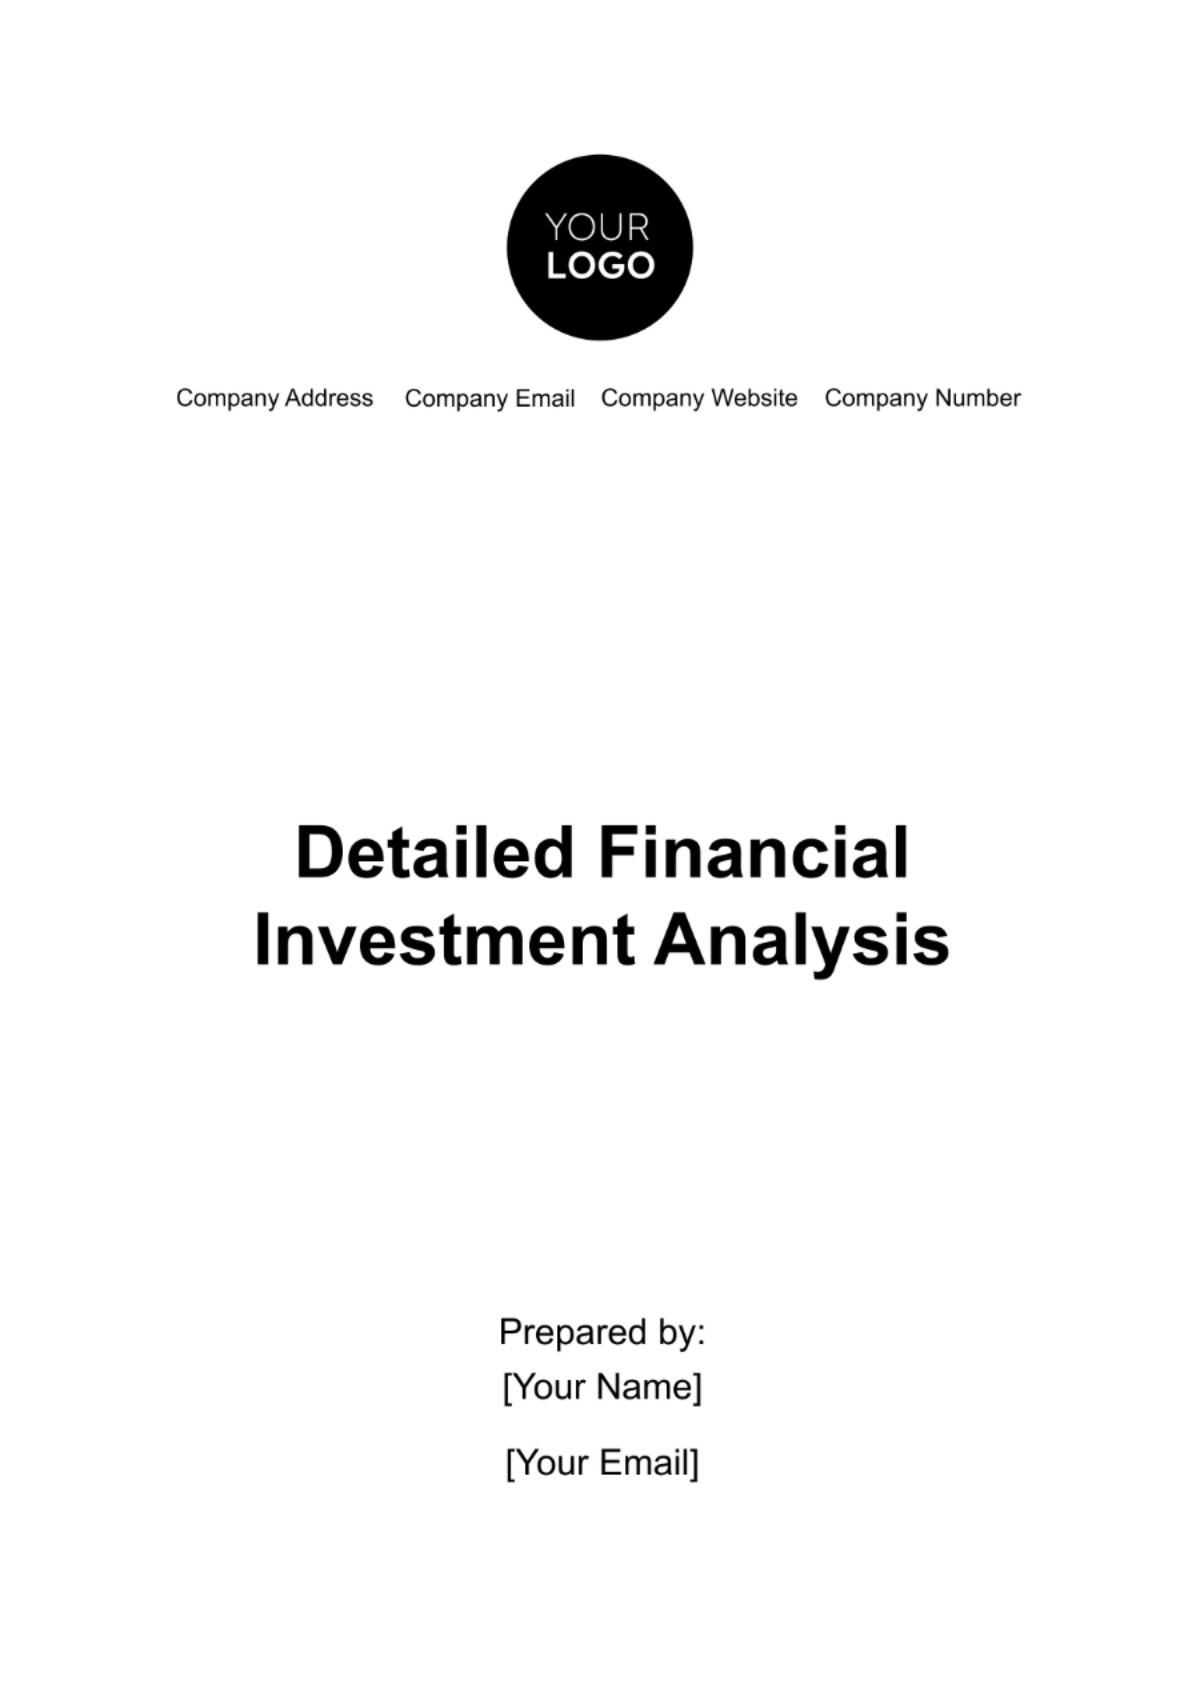 Detailed Financial Investment Analysis Template